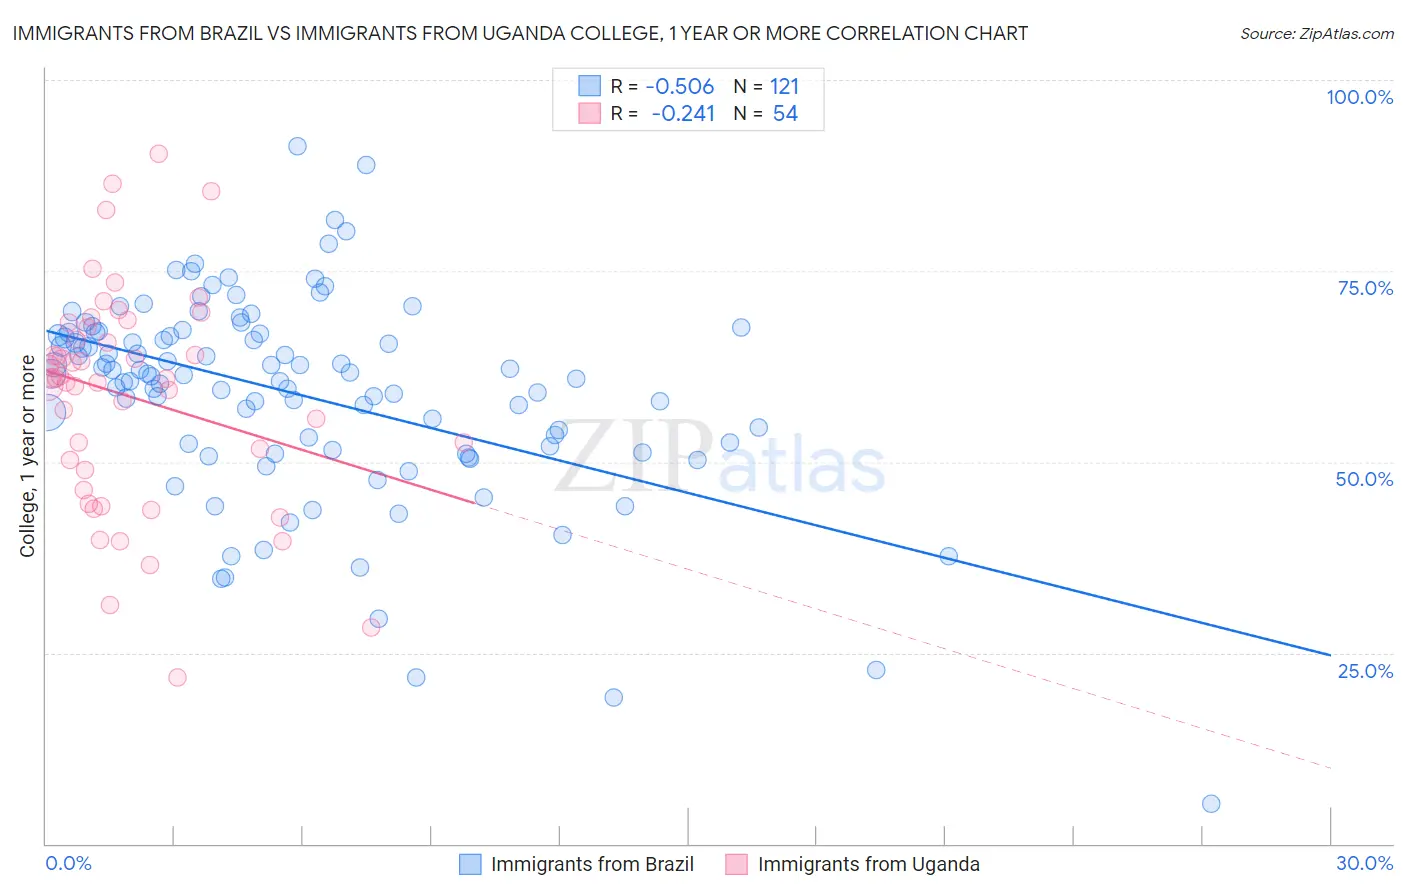 Immigrants from Brazil vs Immigrants from Uganda College, 1 year or more